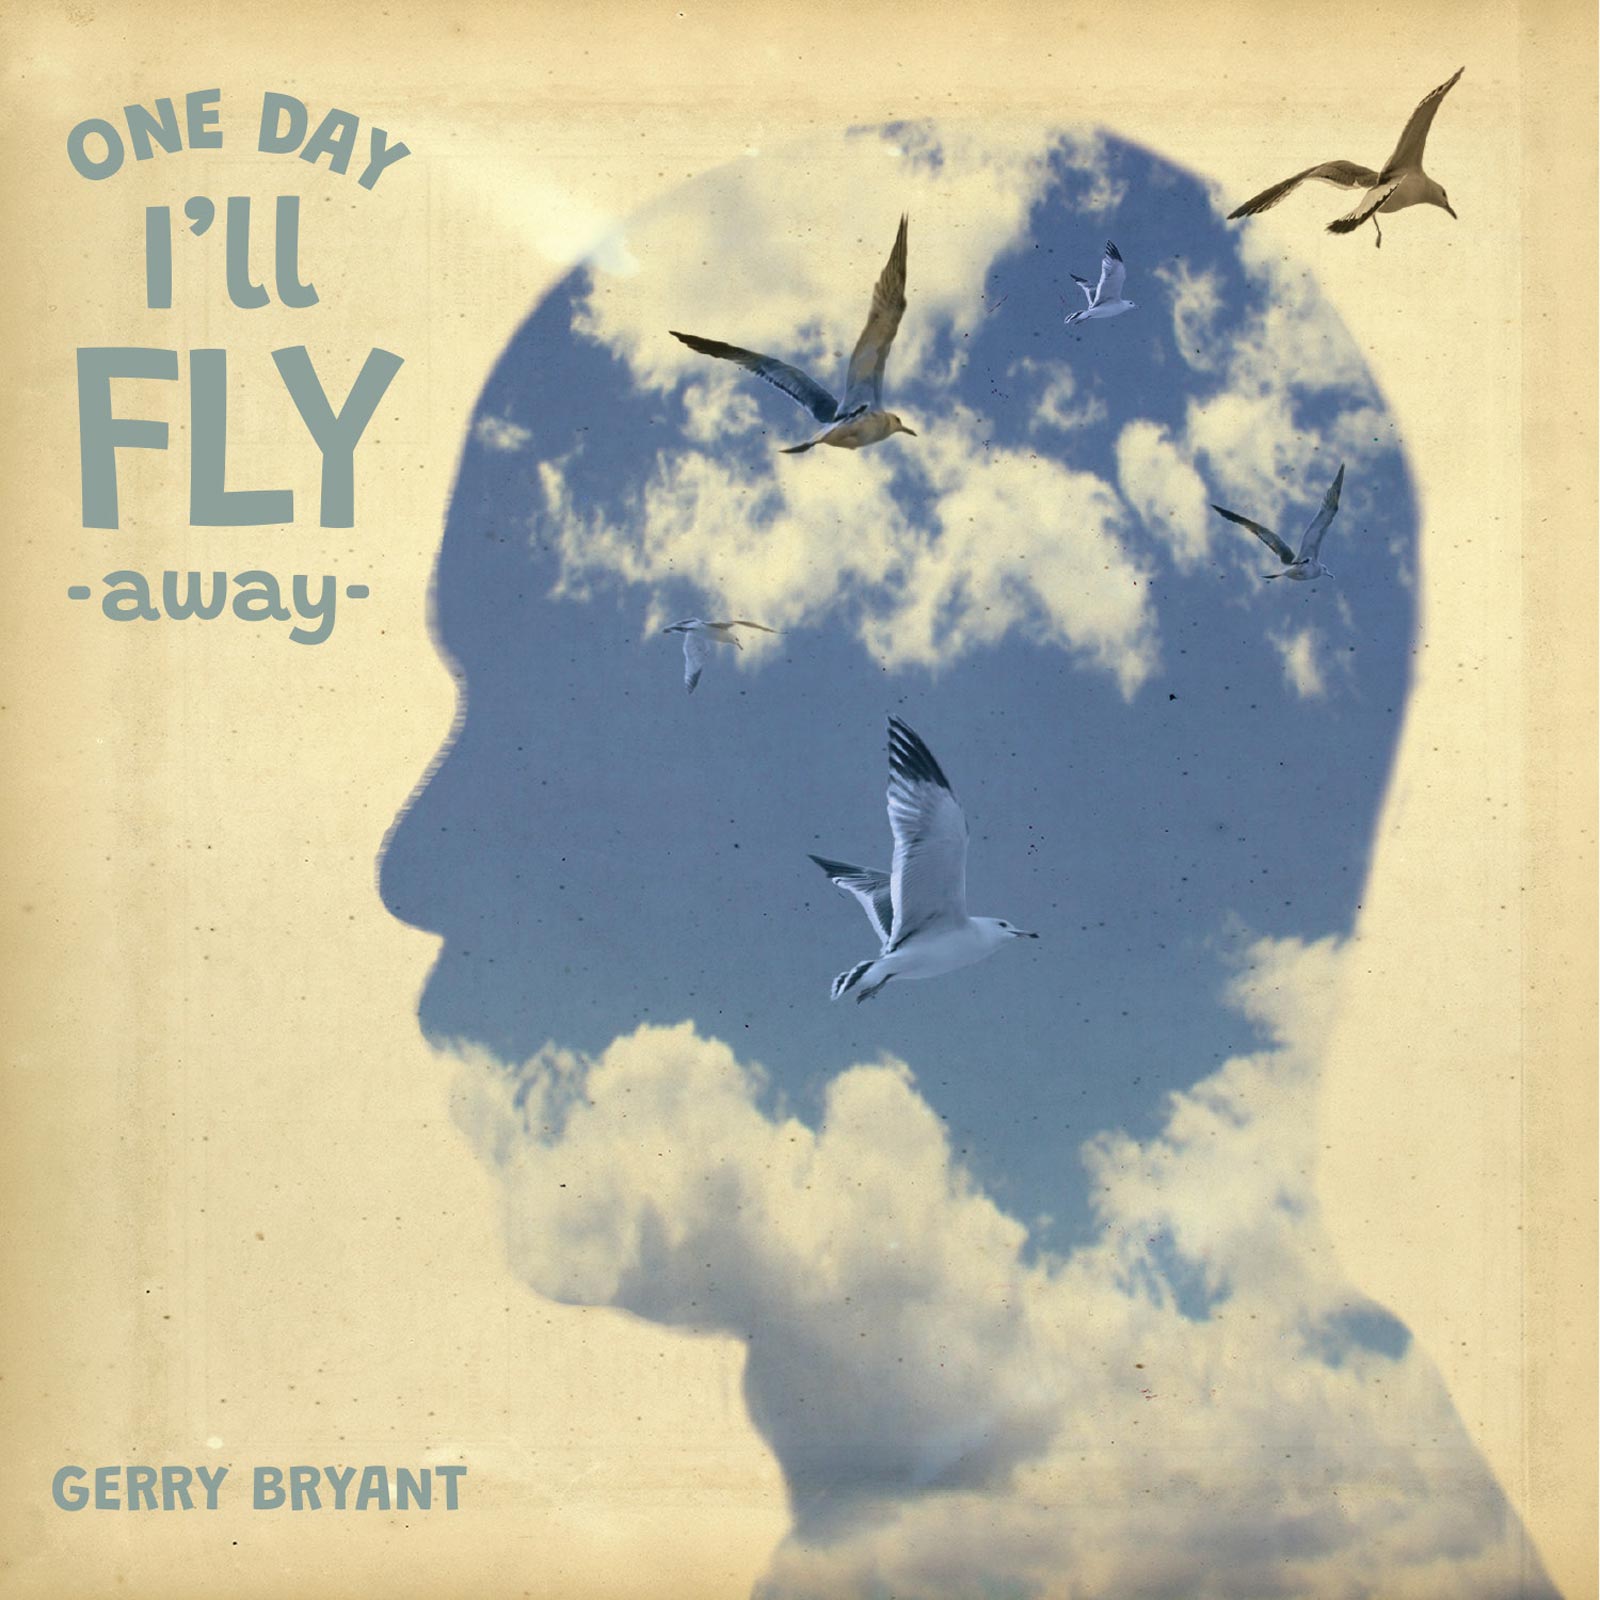 ONE DAY I'LL FLY AWAY